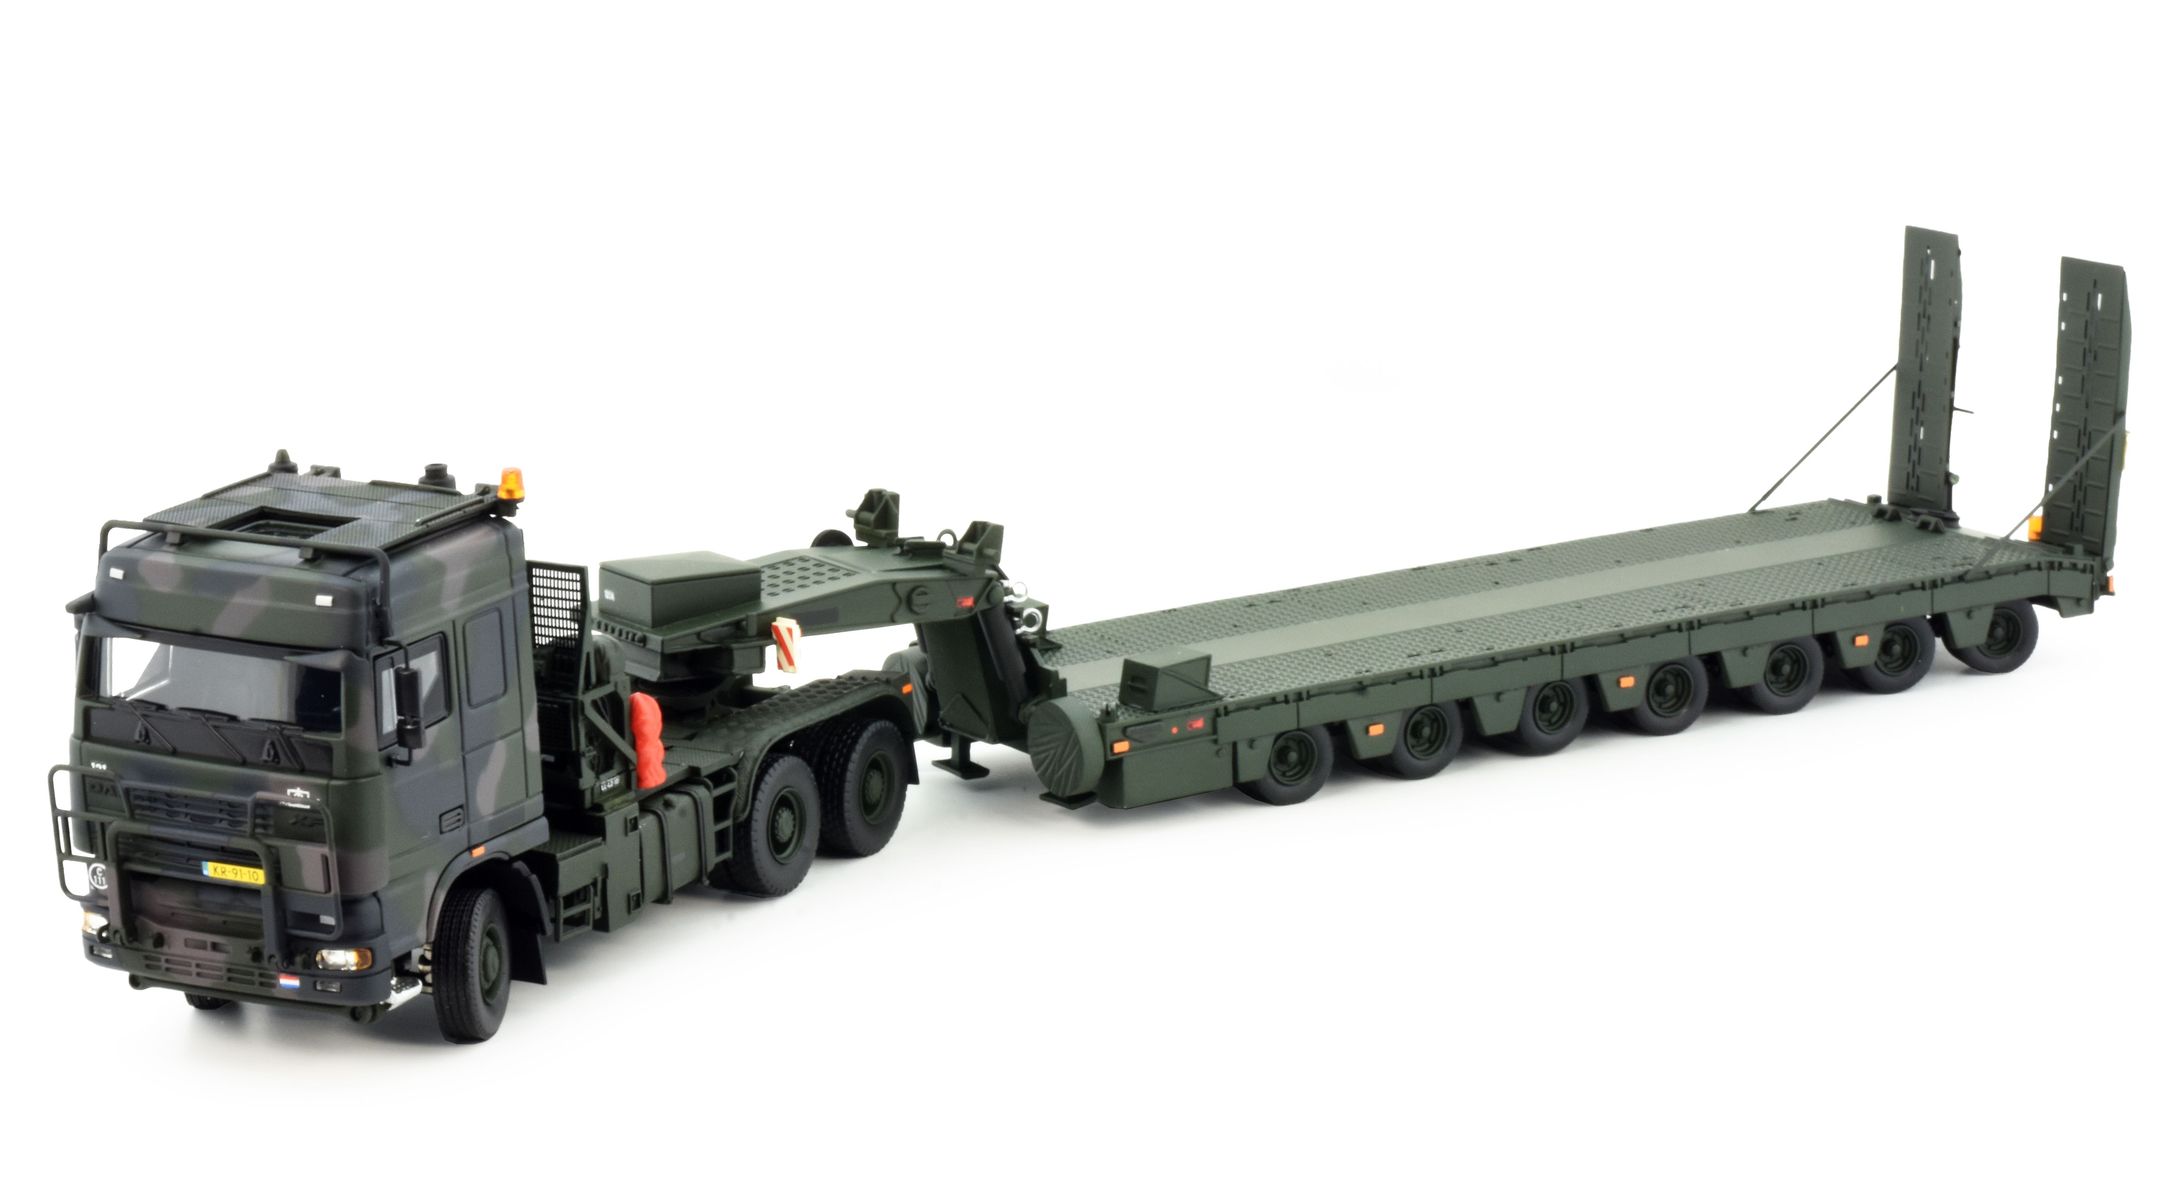 Product Image - Tekno 84976 - DAF Military Tropco Pantser 6x4 Truck with 7 axle Low Loader - Scale 1:50